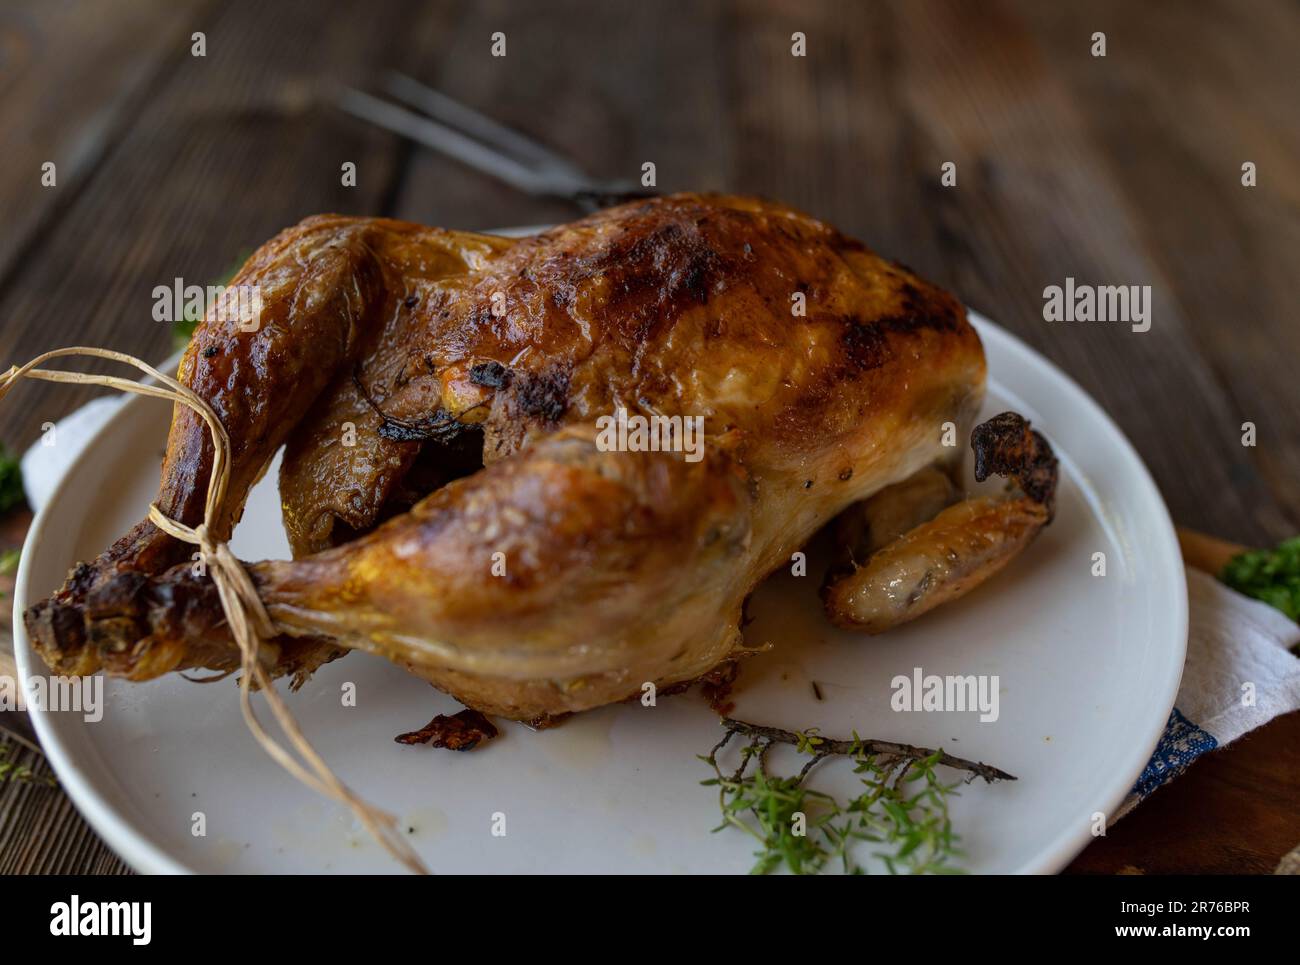 Oven roasted whole chicken on a plate isolated on wooden table Stock Photo